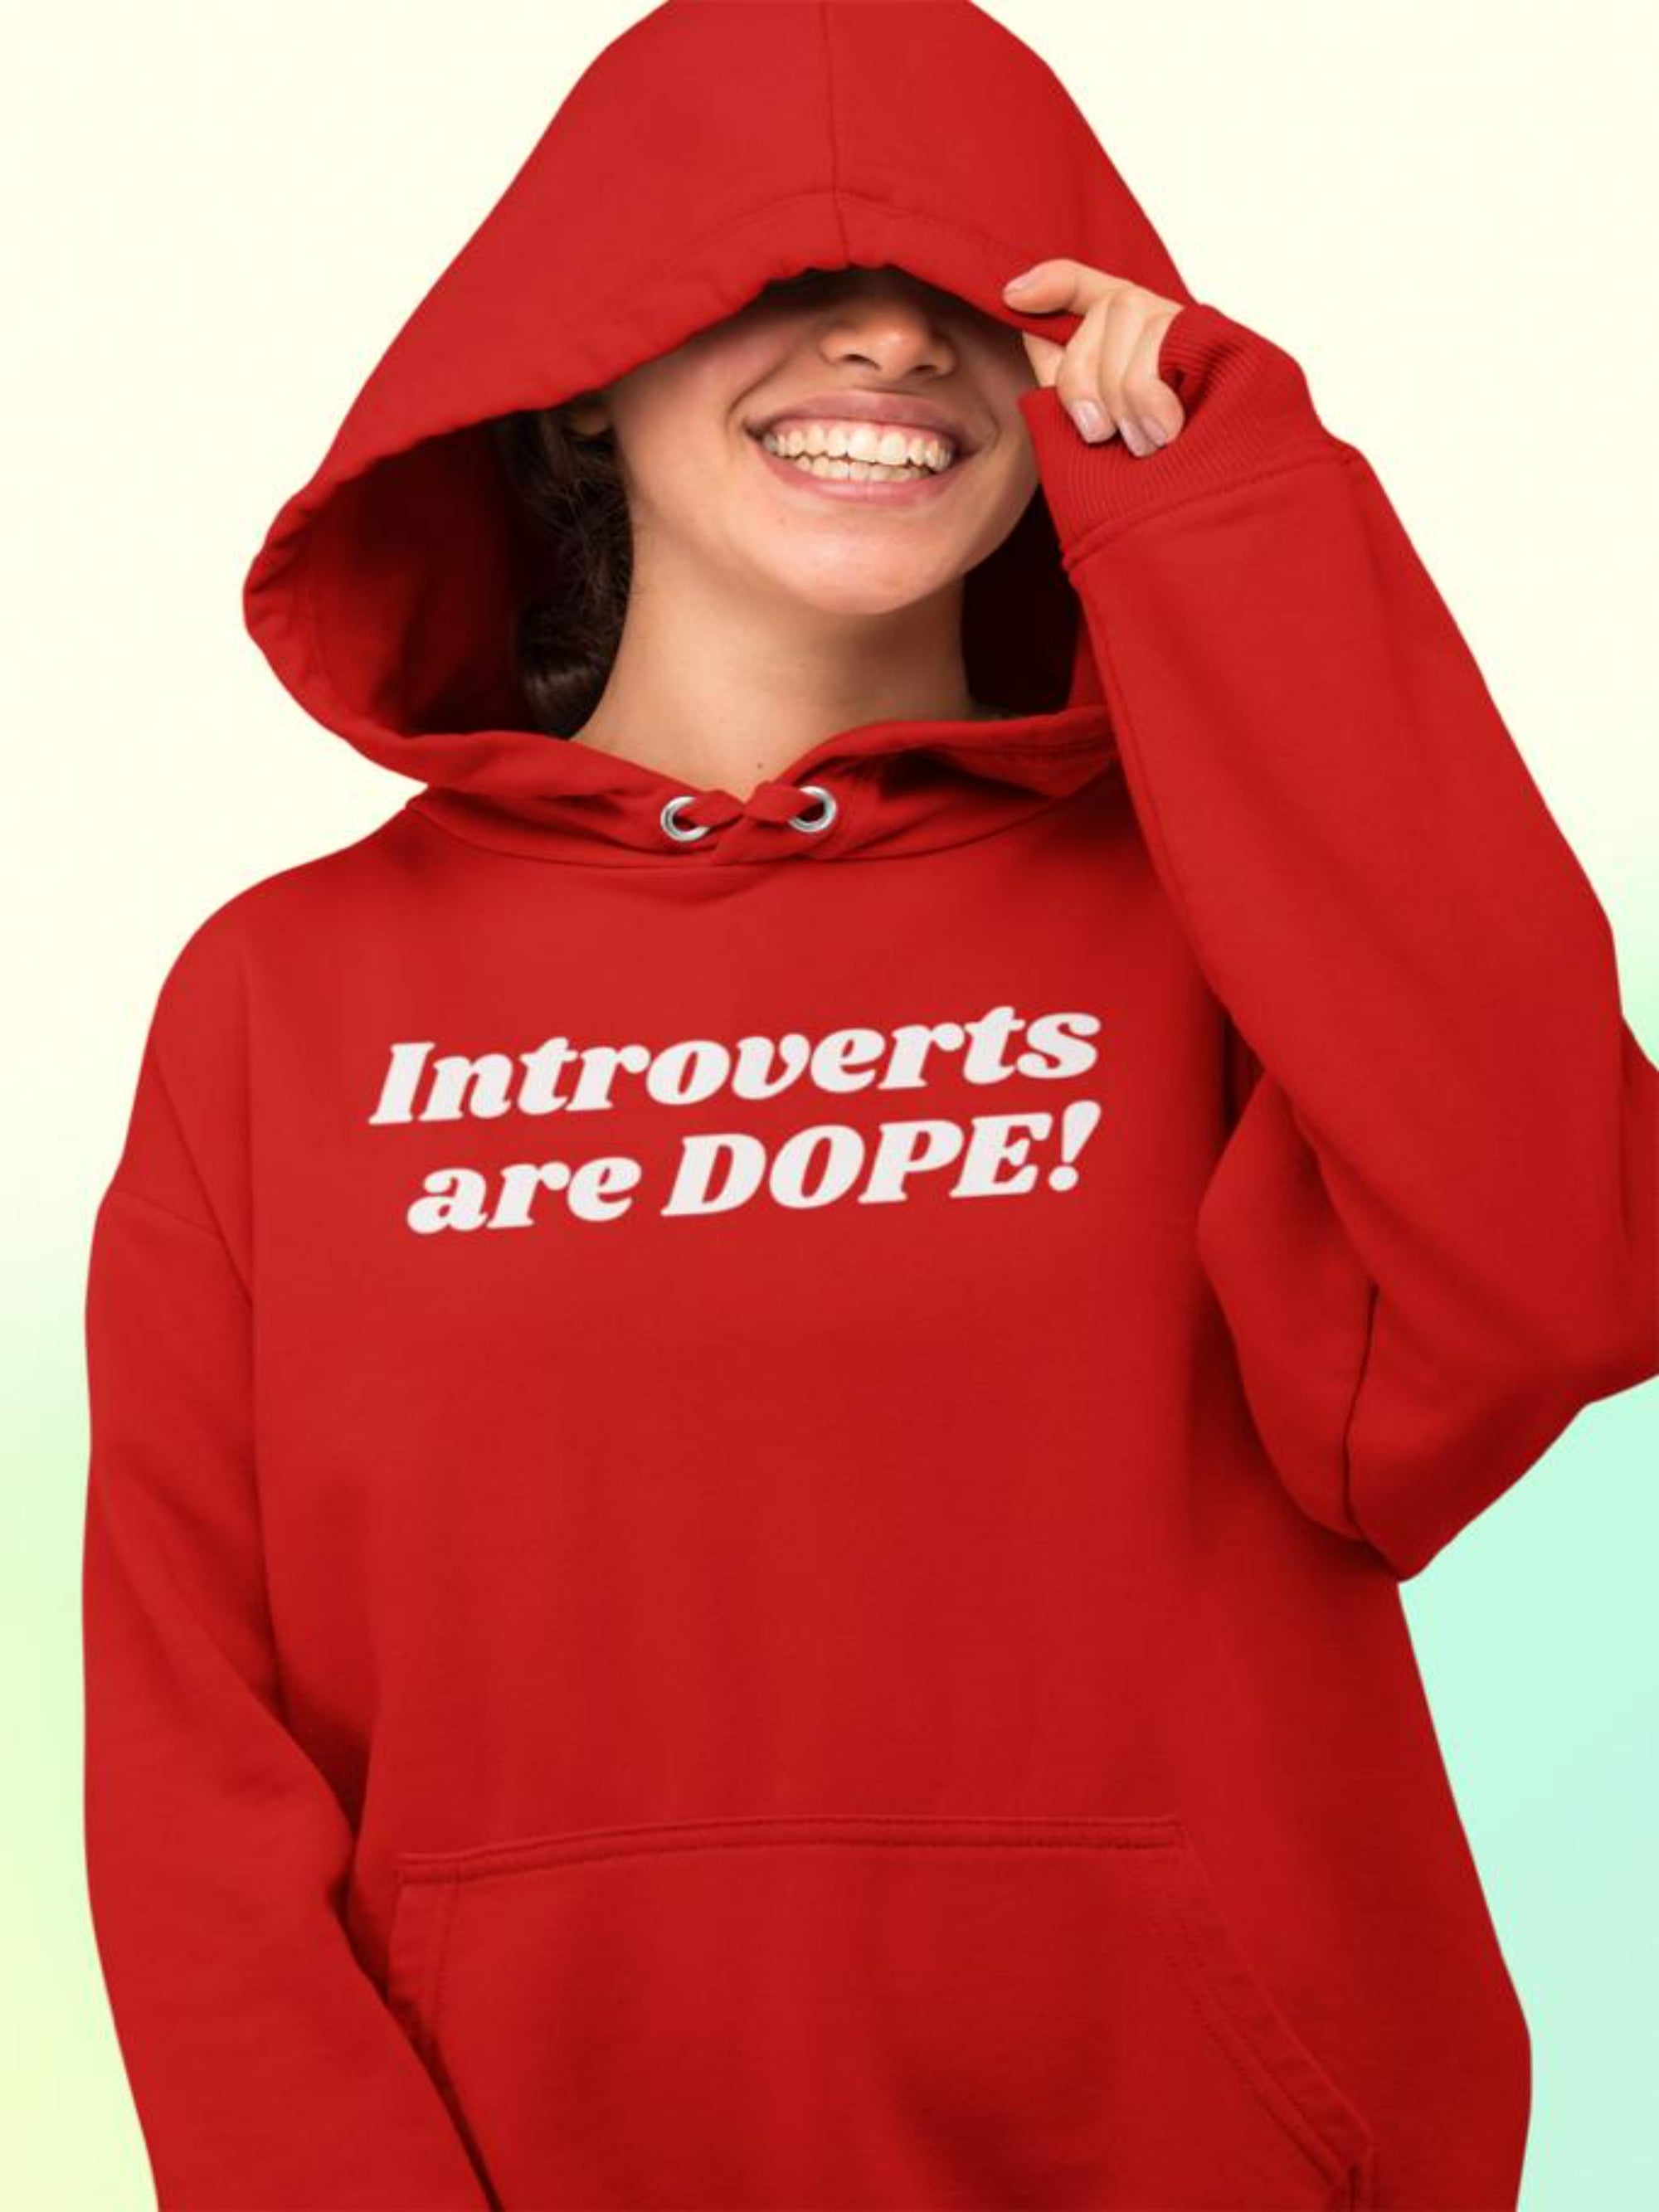 Introverts are DOPE!